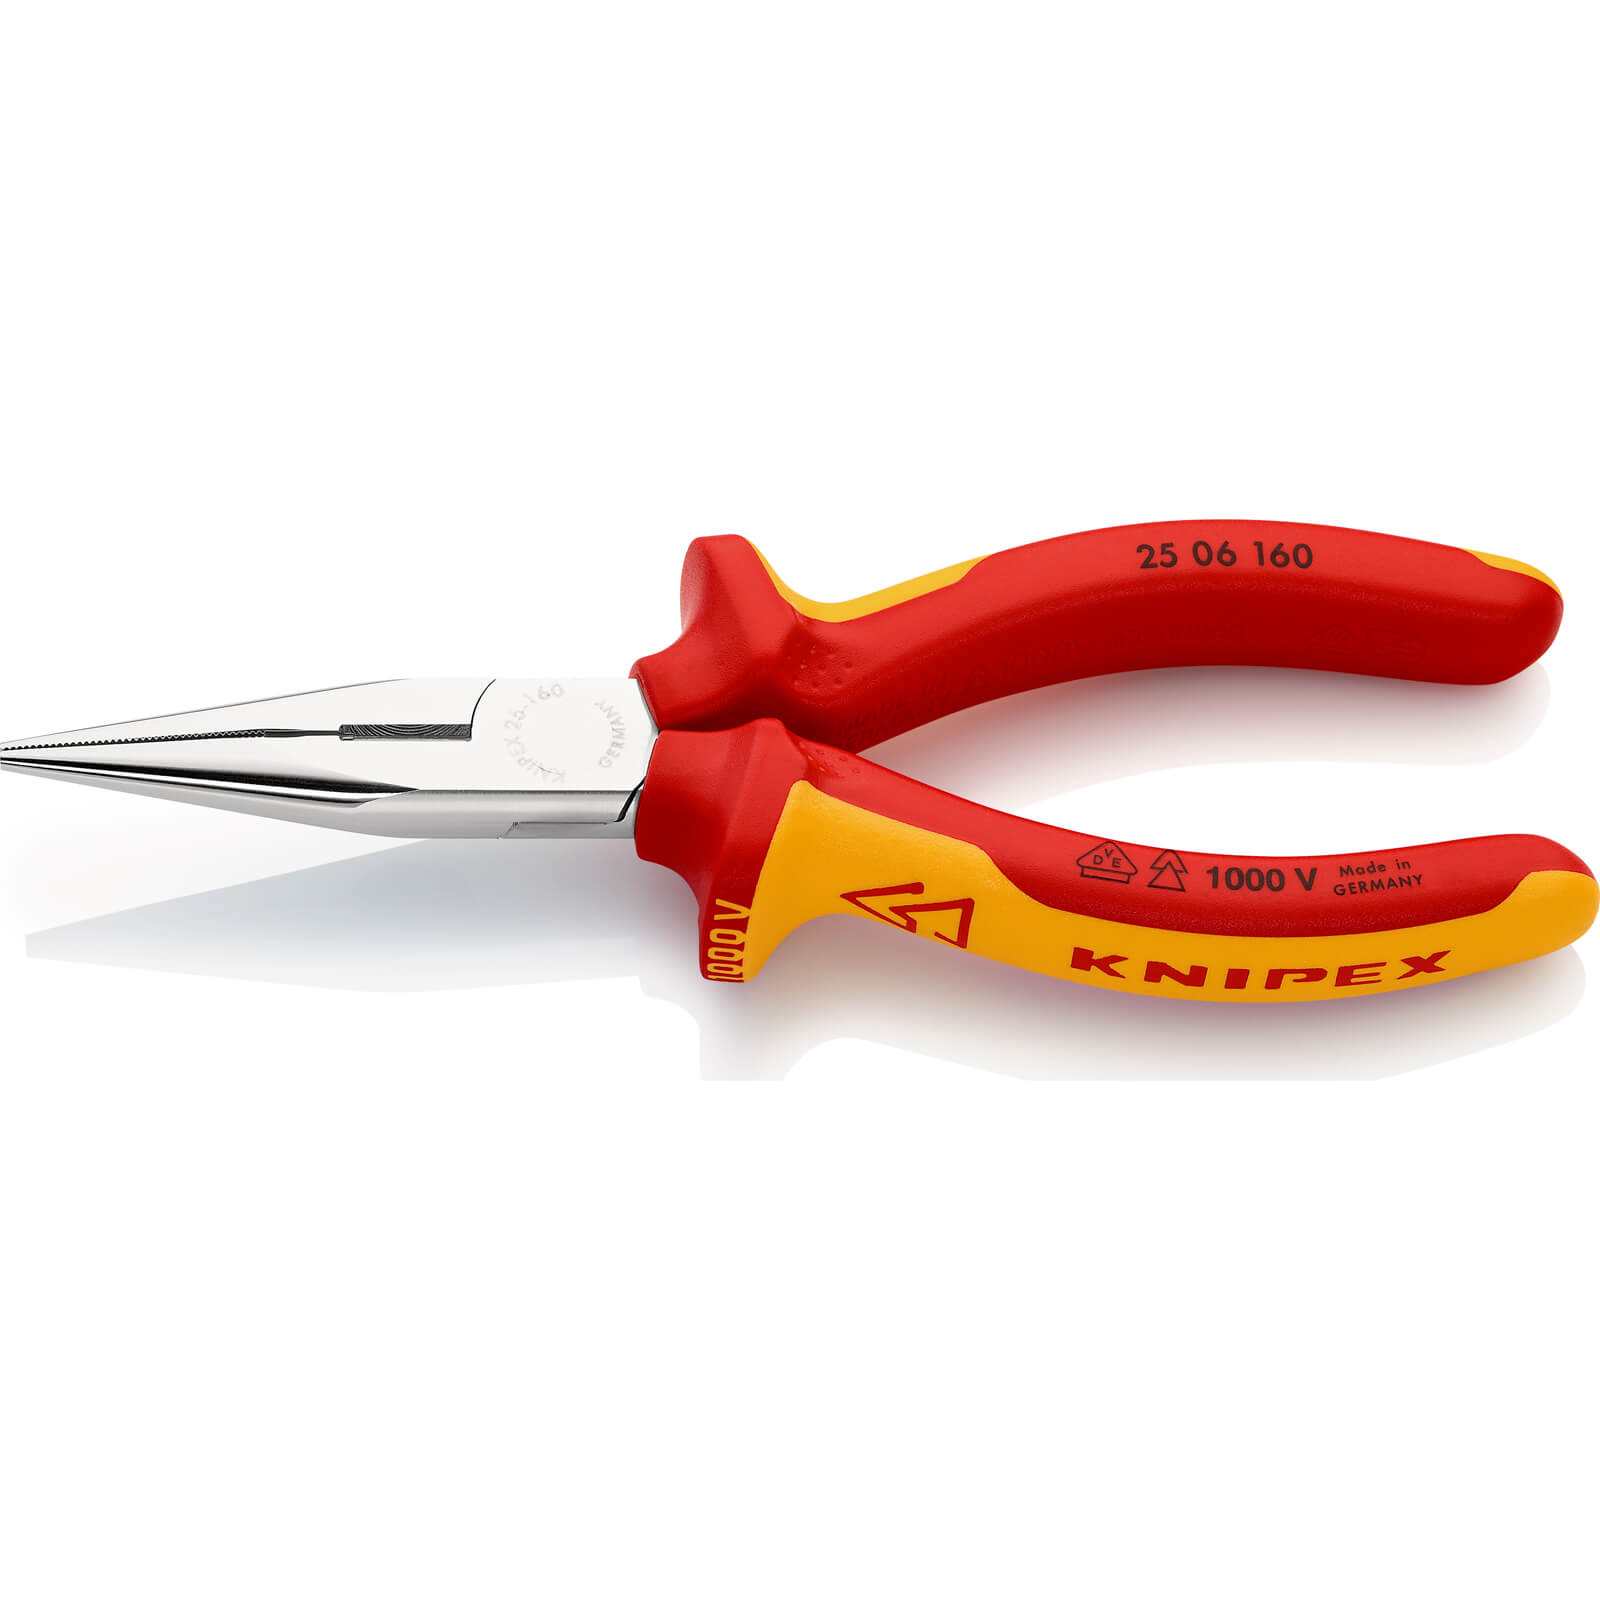 Photo of Knipex 25 06 Vde Snipe Nose Side Cutting Pliers 160mm